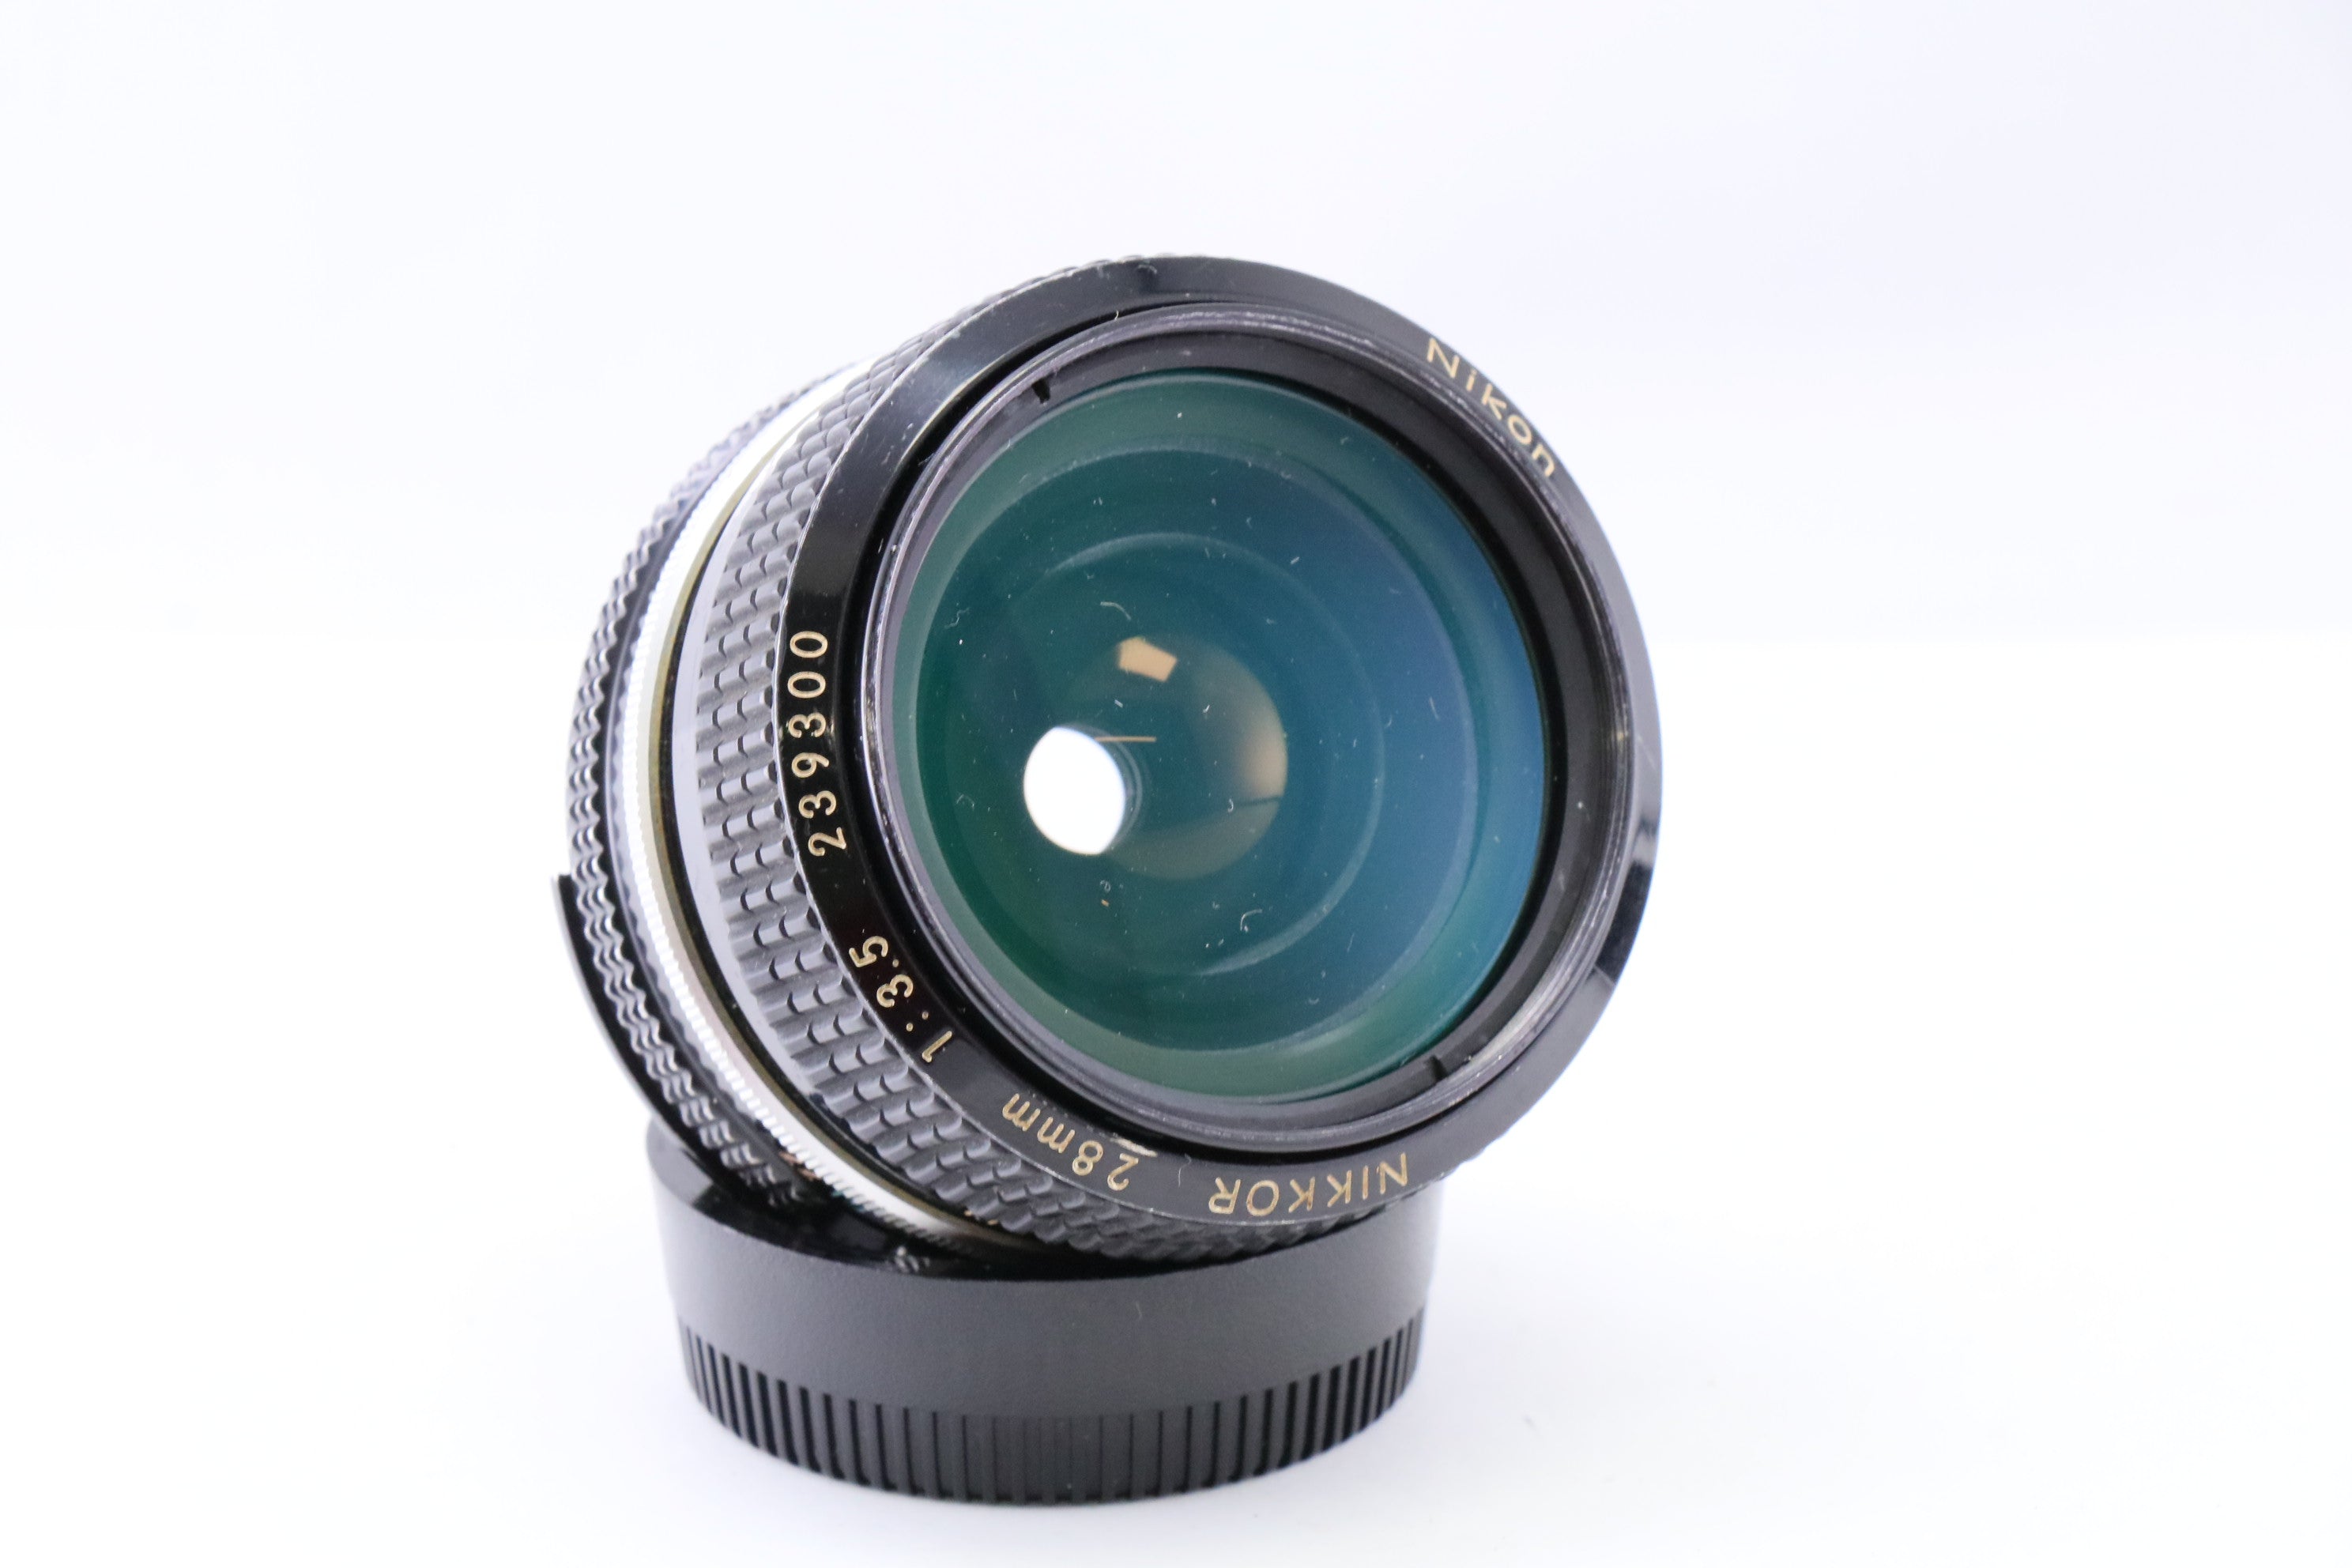 Nikon ニコン New Nikkor 28mm f3.5 Ai改